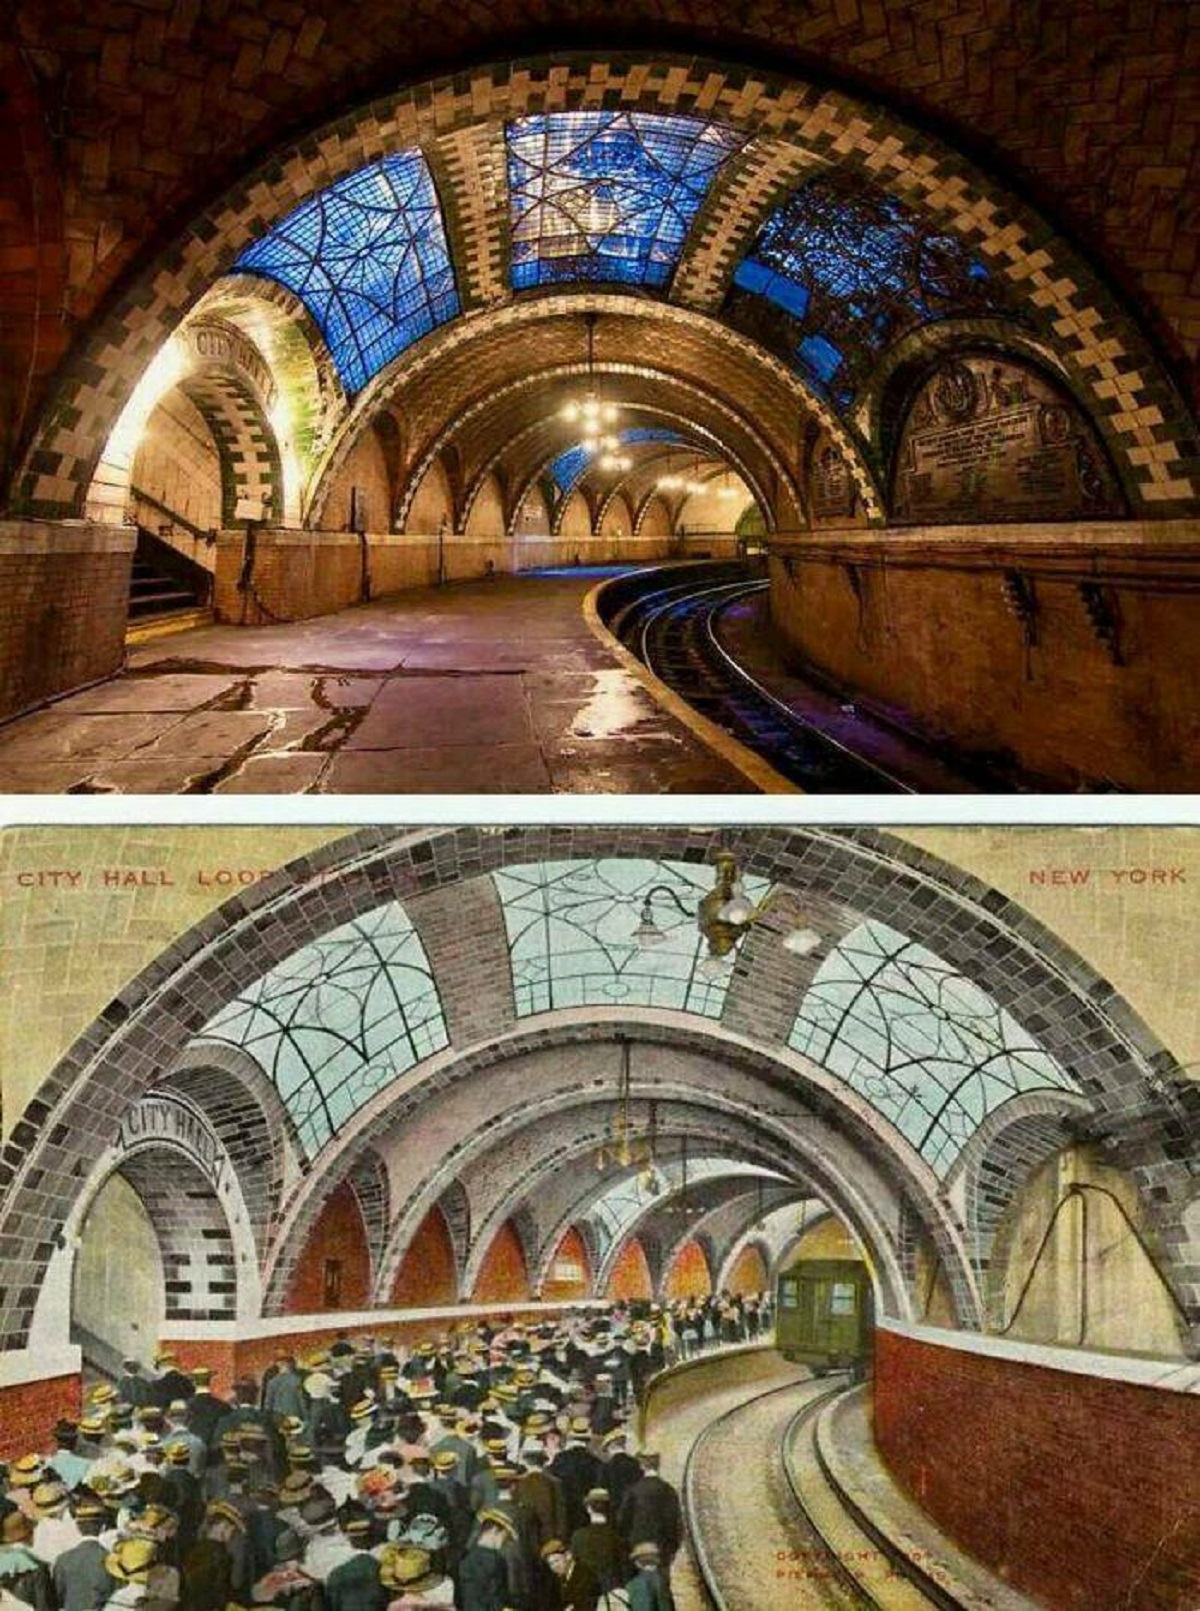 "Abandoned Subway, New York City. Built In 1904"